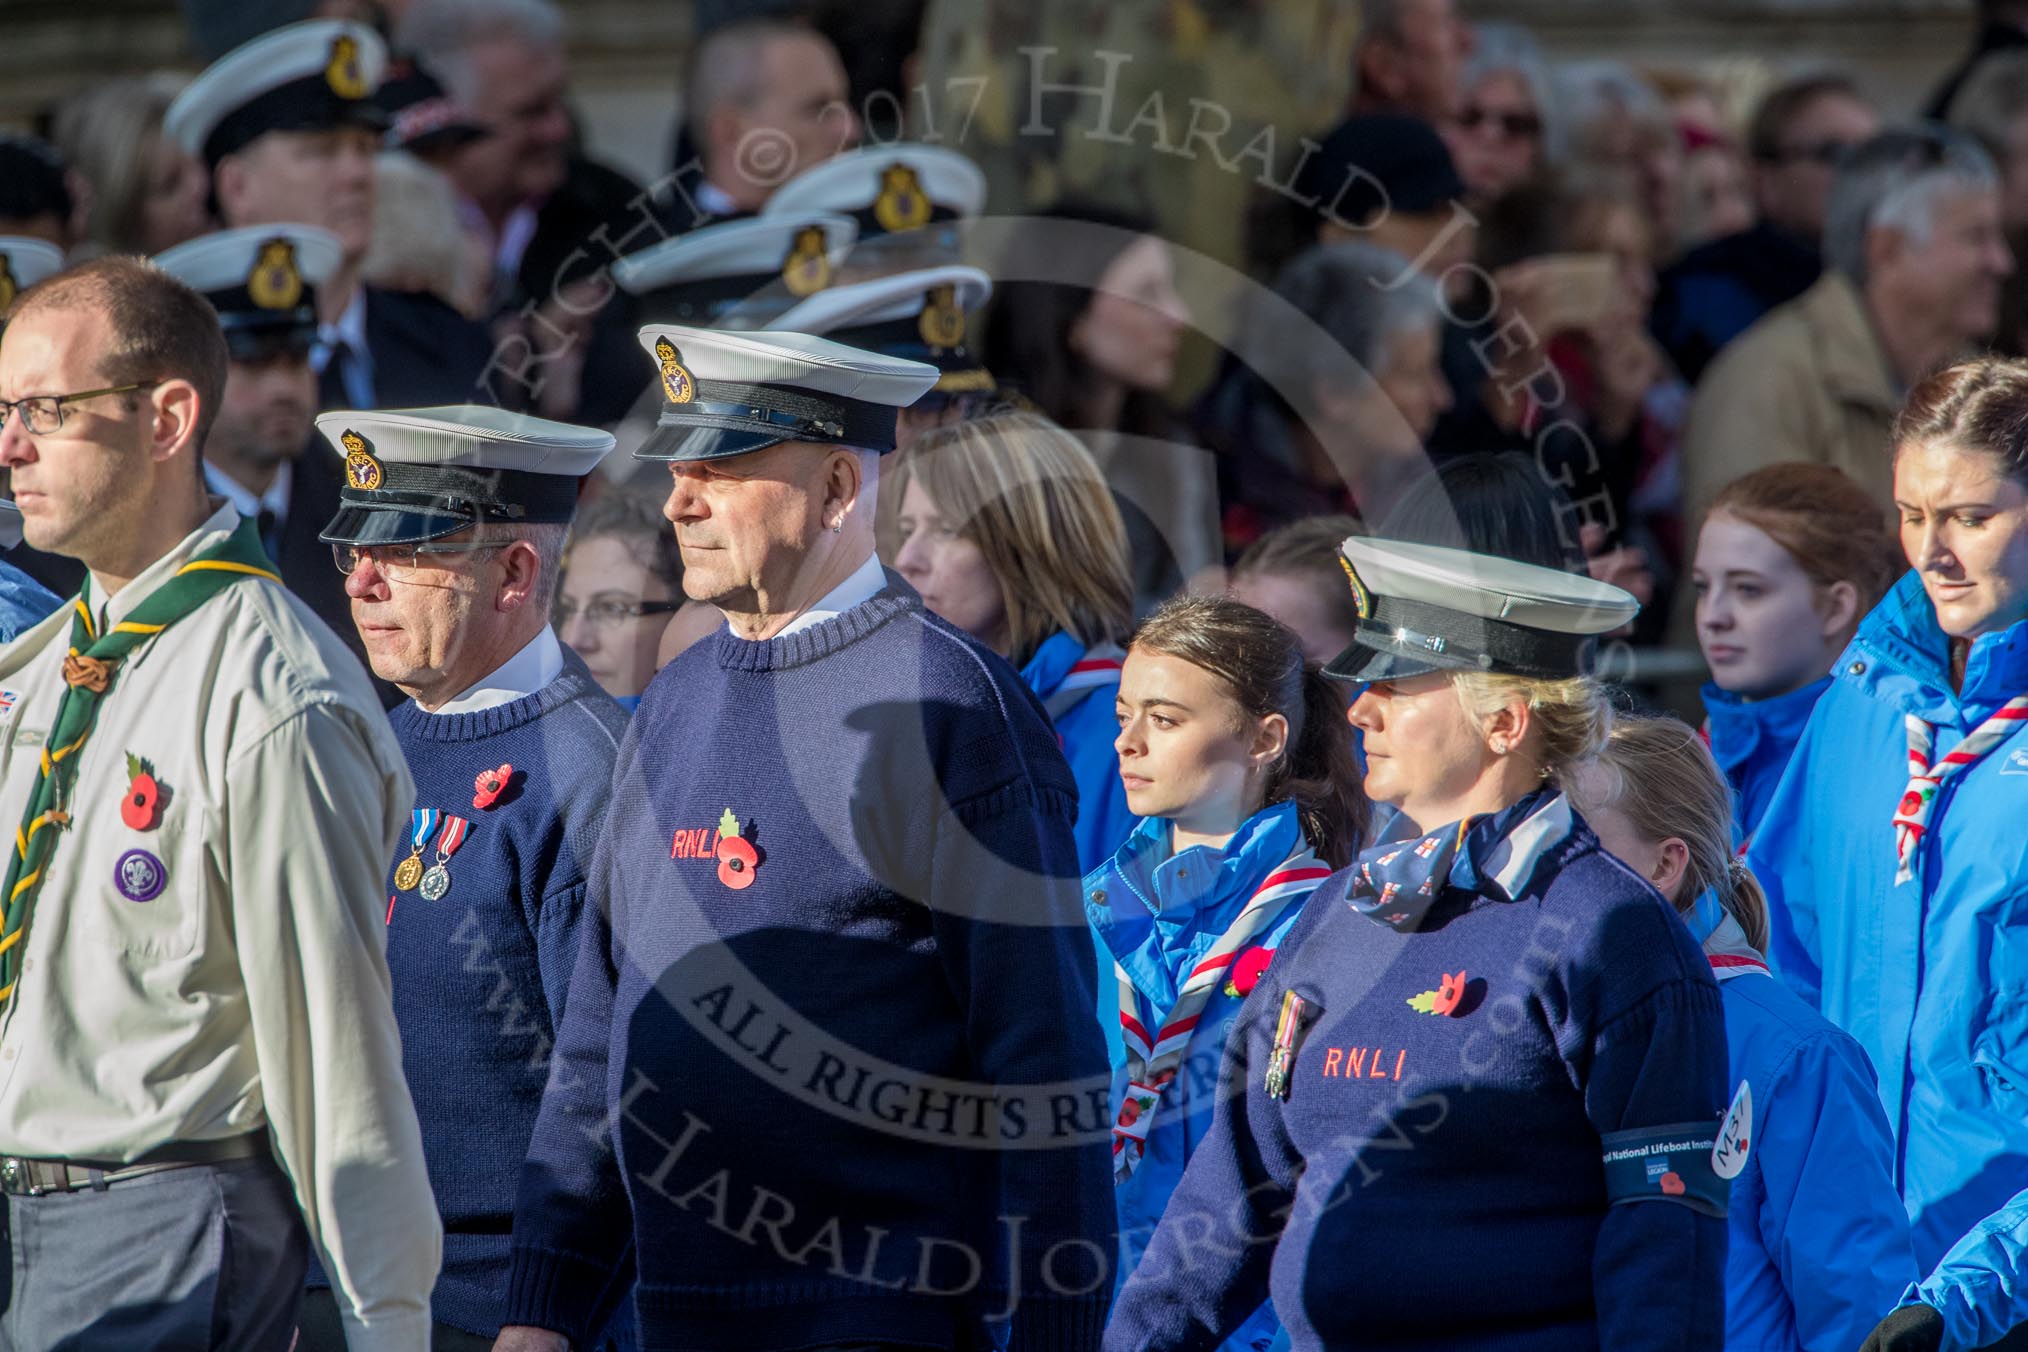 Royal National Lifeboat Institution (Group M37, 6 members) during the Royal British Legion March Past on Remembrance Sunday at the Cenotaph, Whitehall, Westminster, London, 11 November 2018, 12:30.